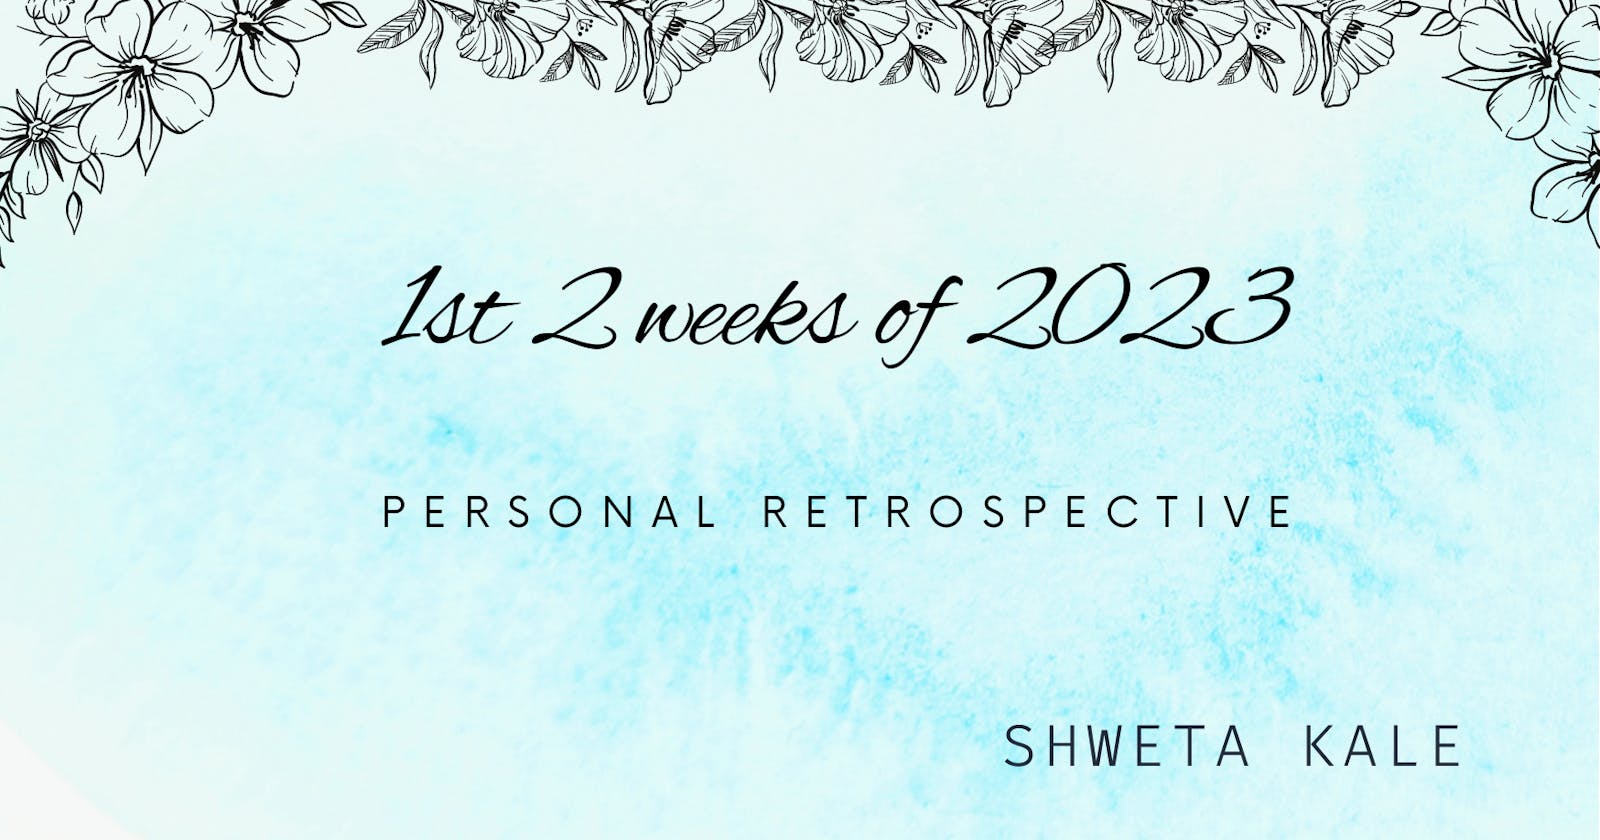 2023: A Fresh Start - Reflecting on the First Two Weeks of the New Year